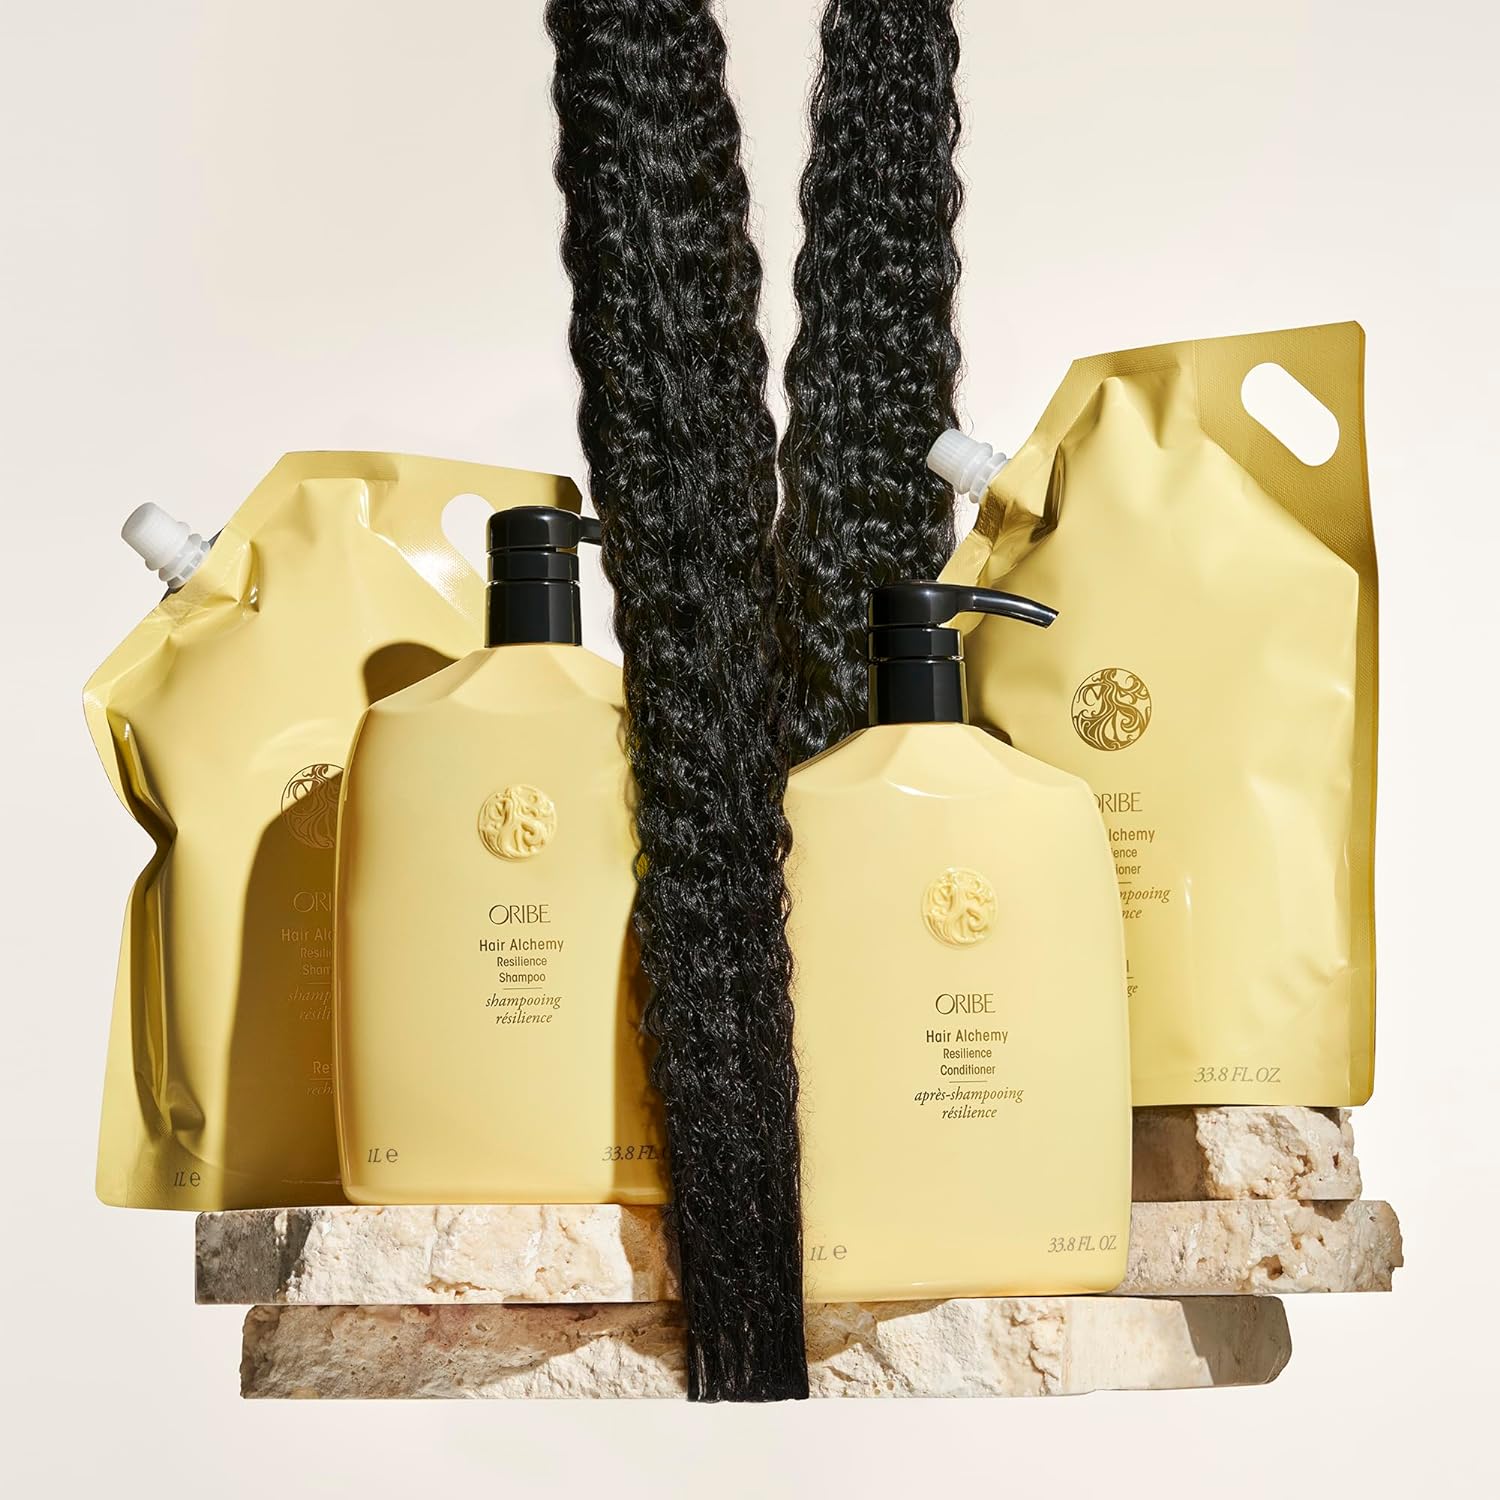 ORIBE Hair Alchemy Resilience Conditioner Liter : Beauty & Personal Care